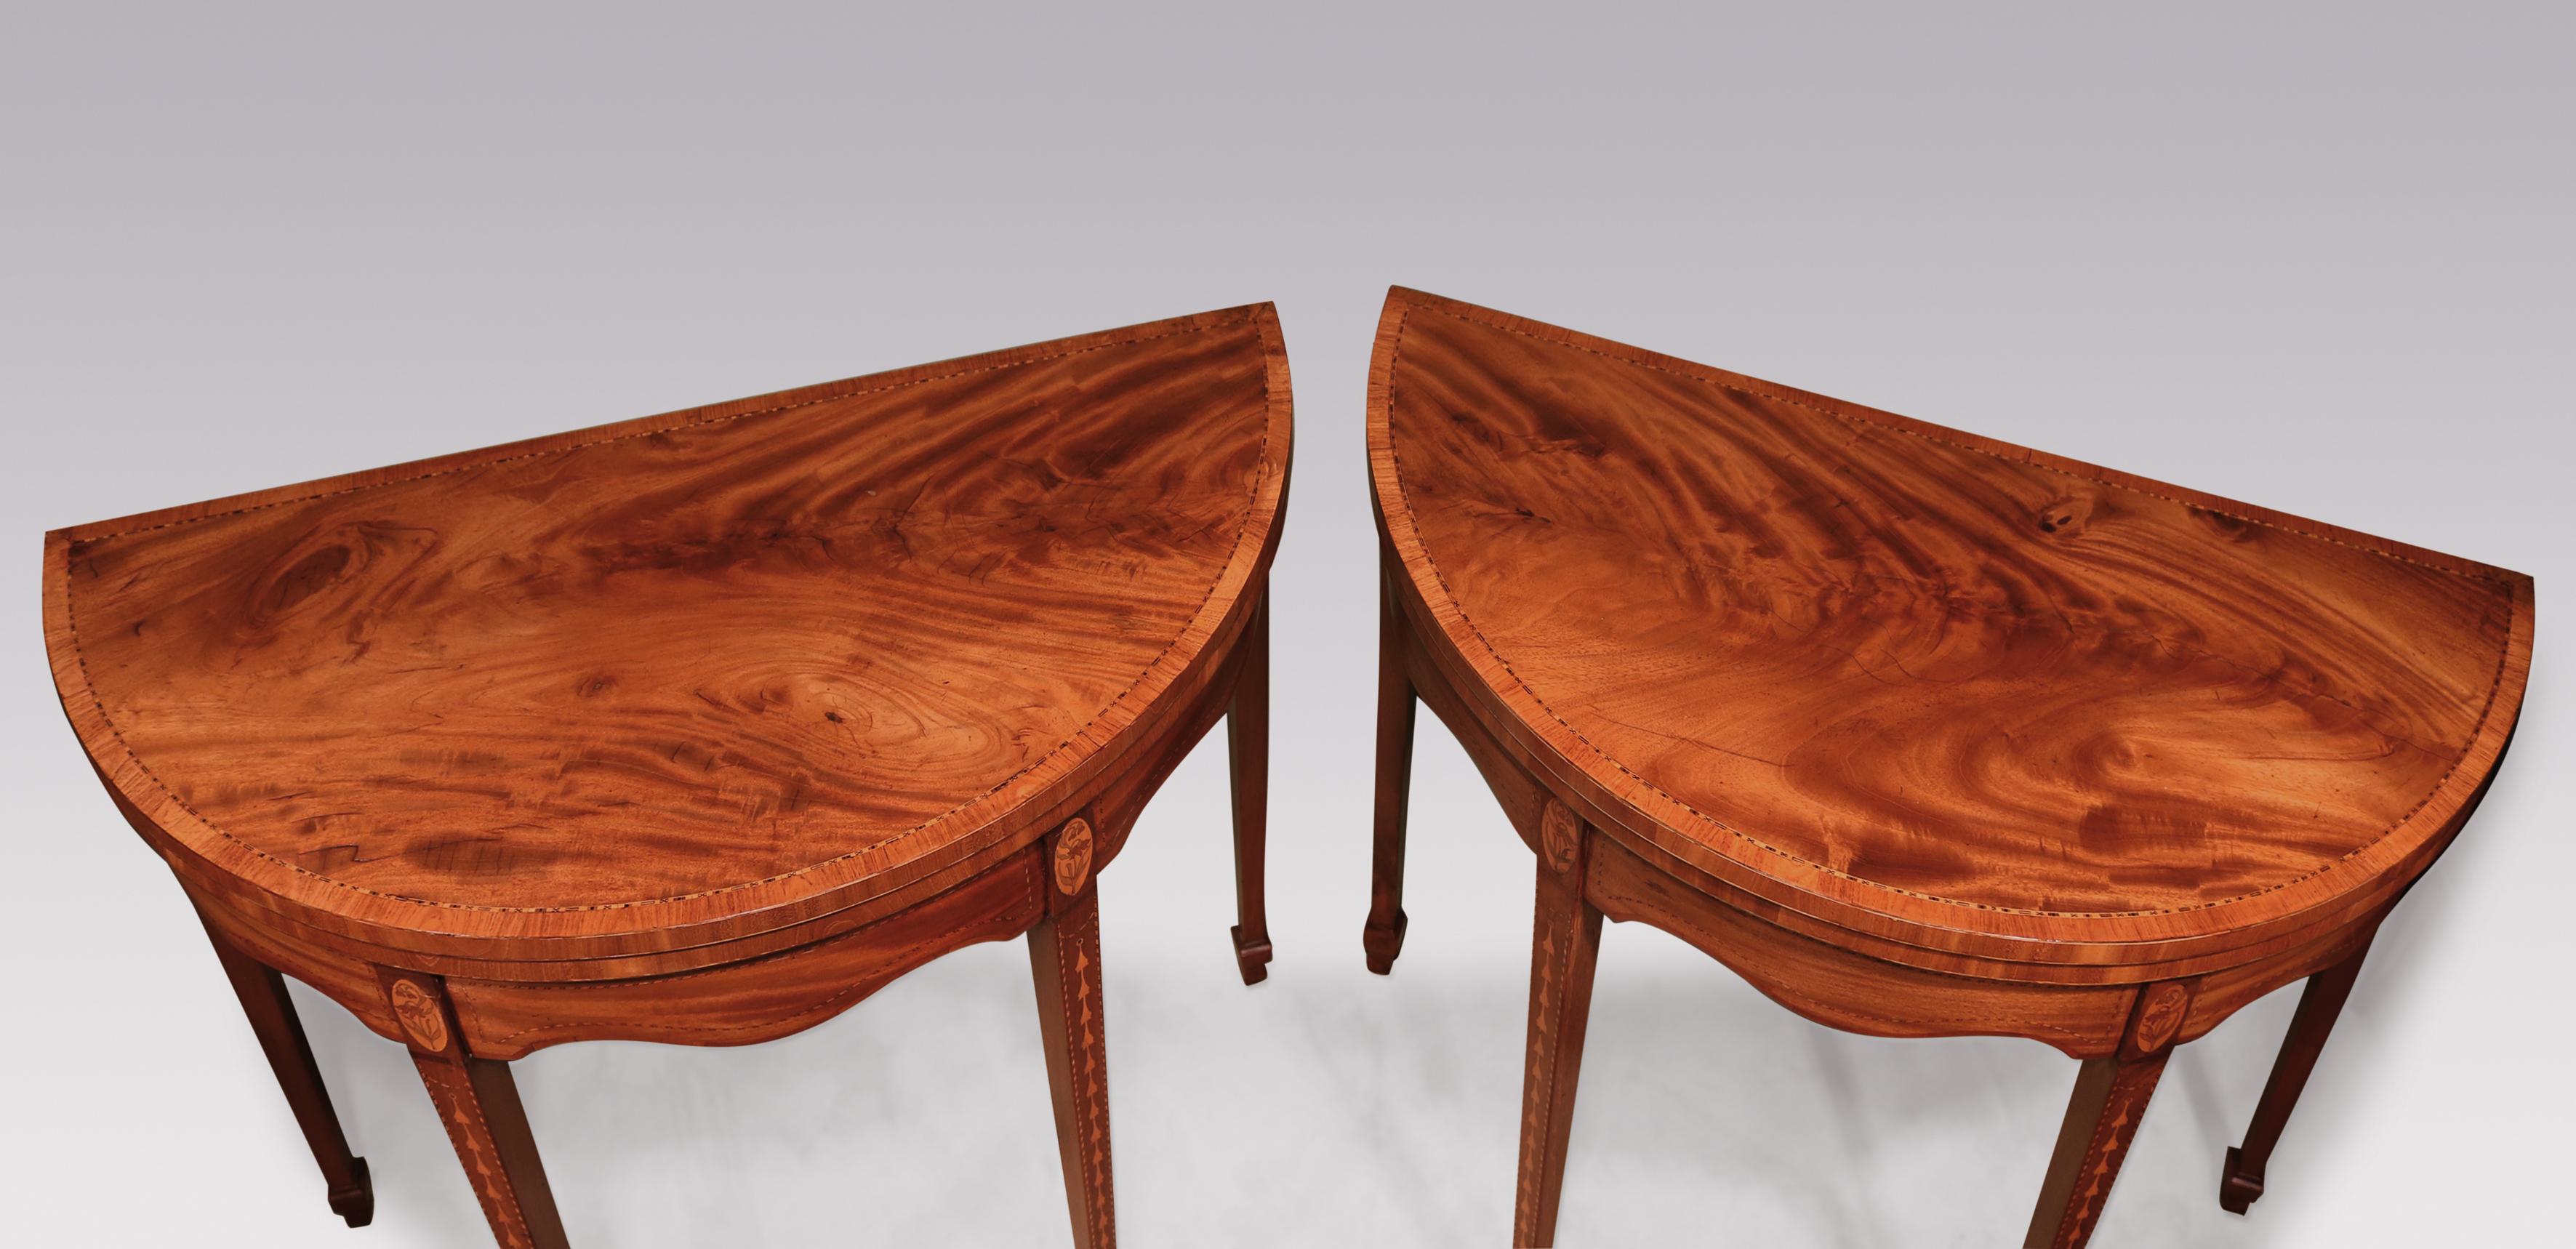 Cross-Banded Pair of Late 18th Century Sheraton Period Figured Mahogany Card Tables For Sale